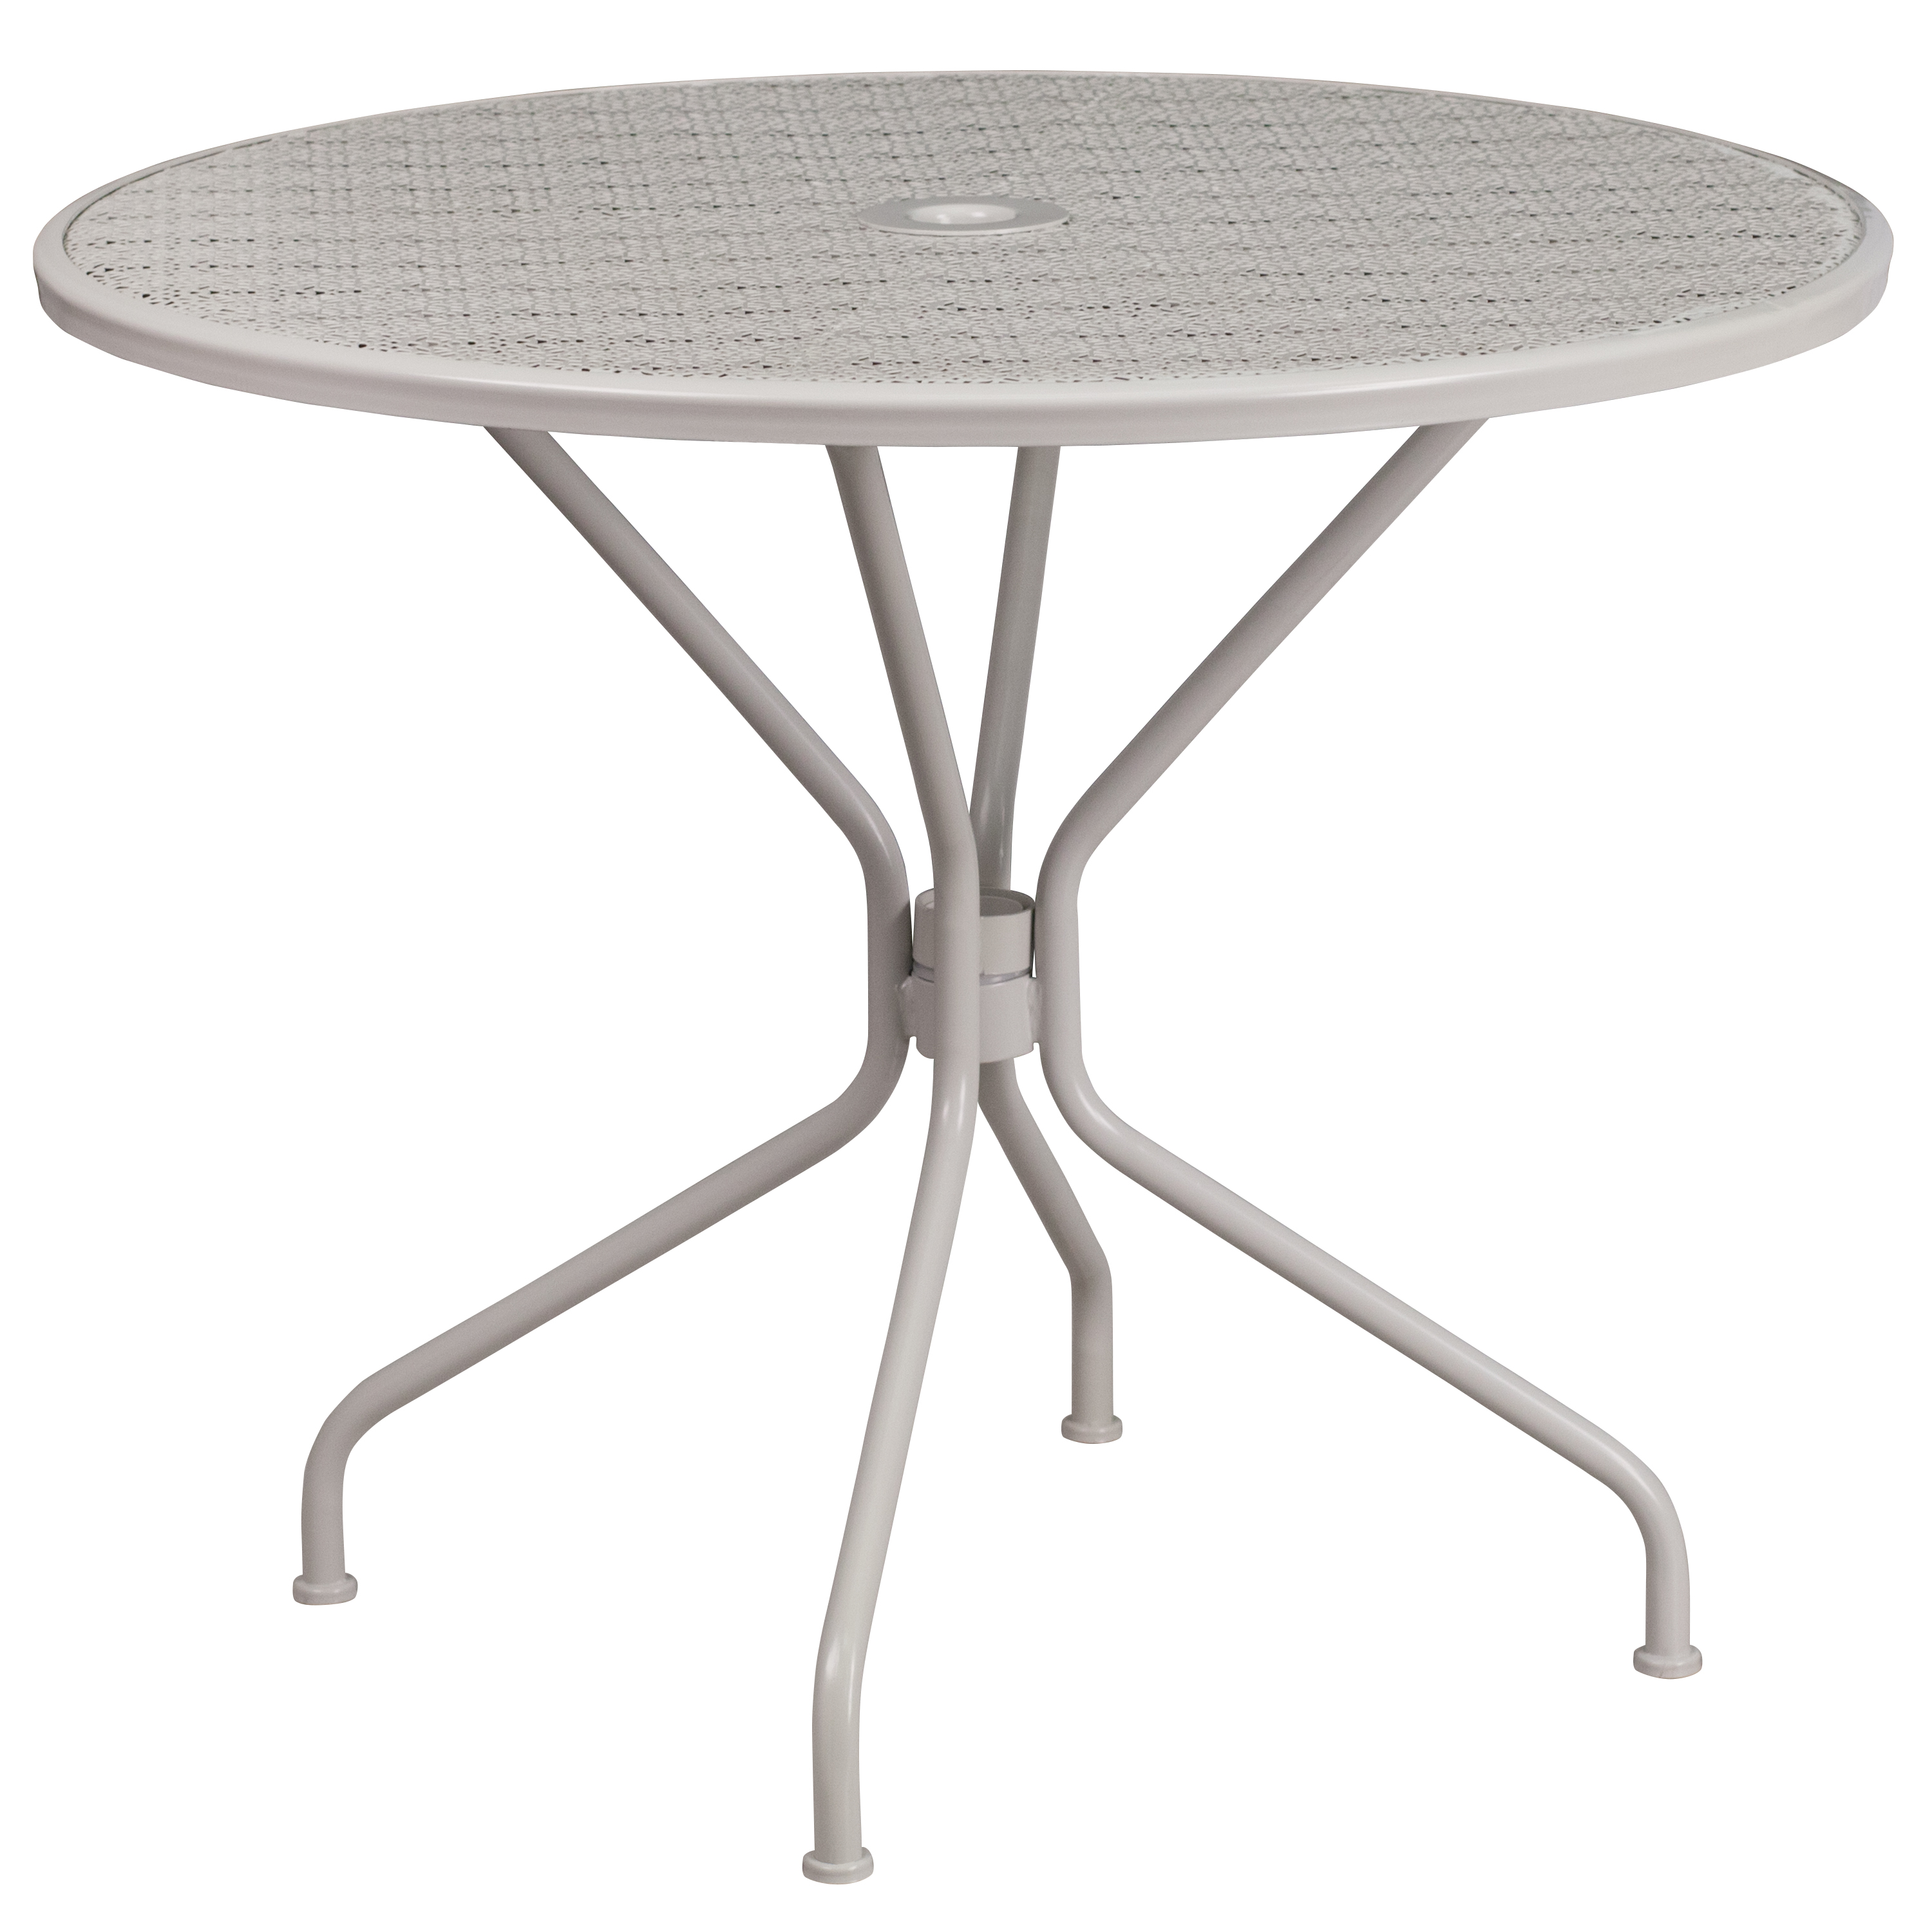 Flash Furniture Commercial Grade 35.25" Round Light Gray Indoor-Outdoor Steel Patio Table Set with 2 Square Back Chairs - image 4 of 5